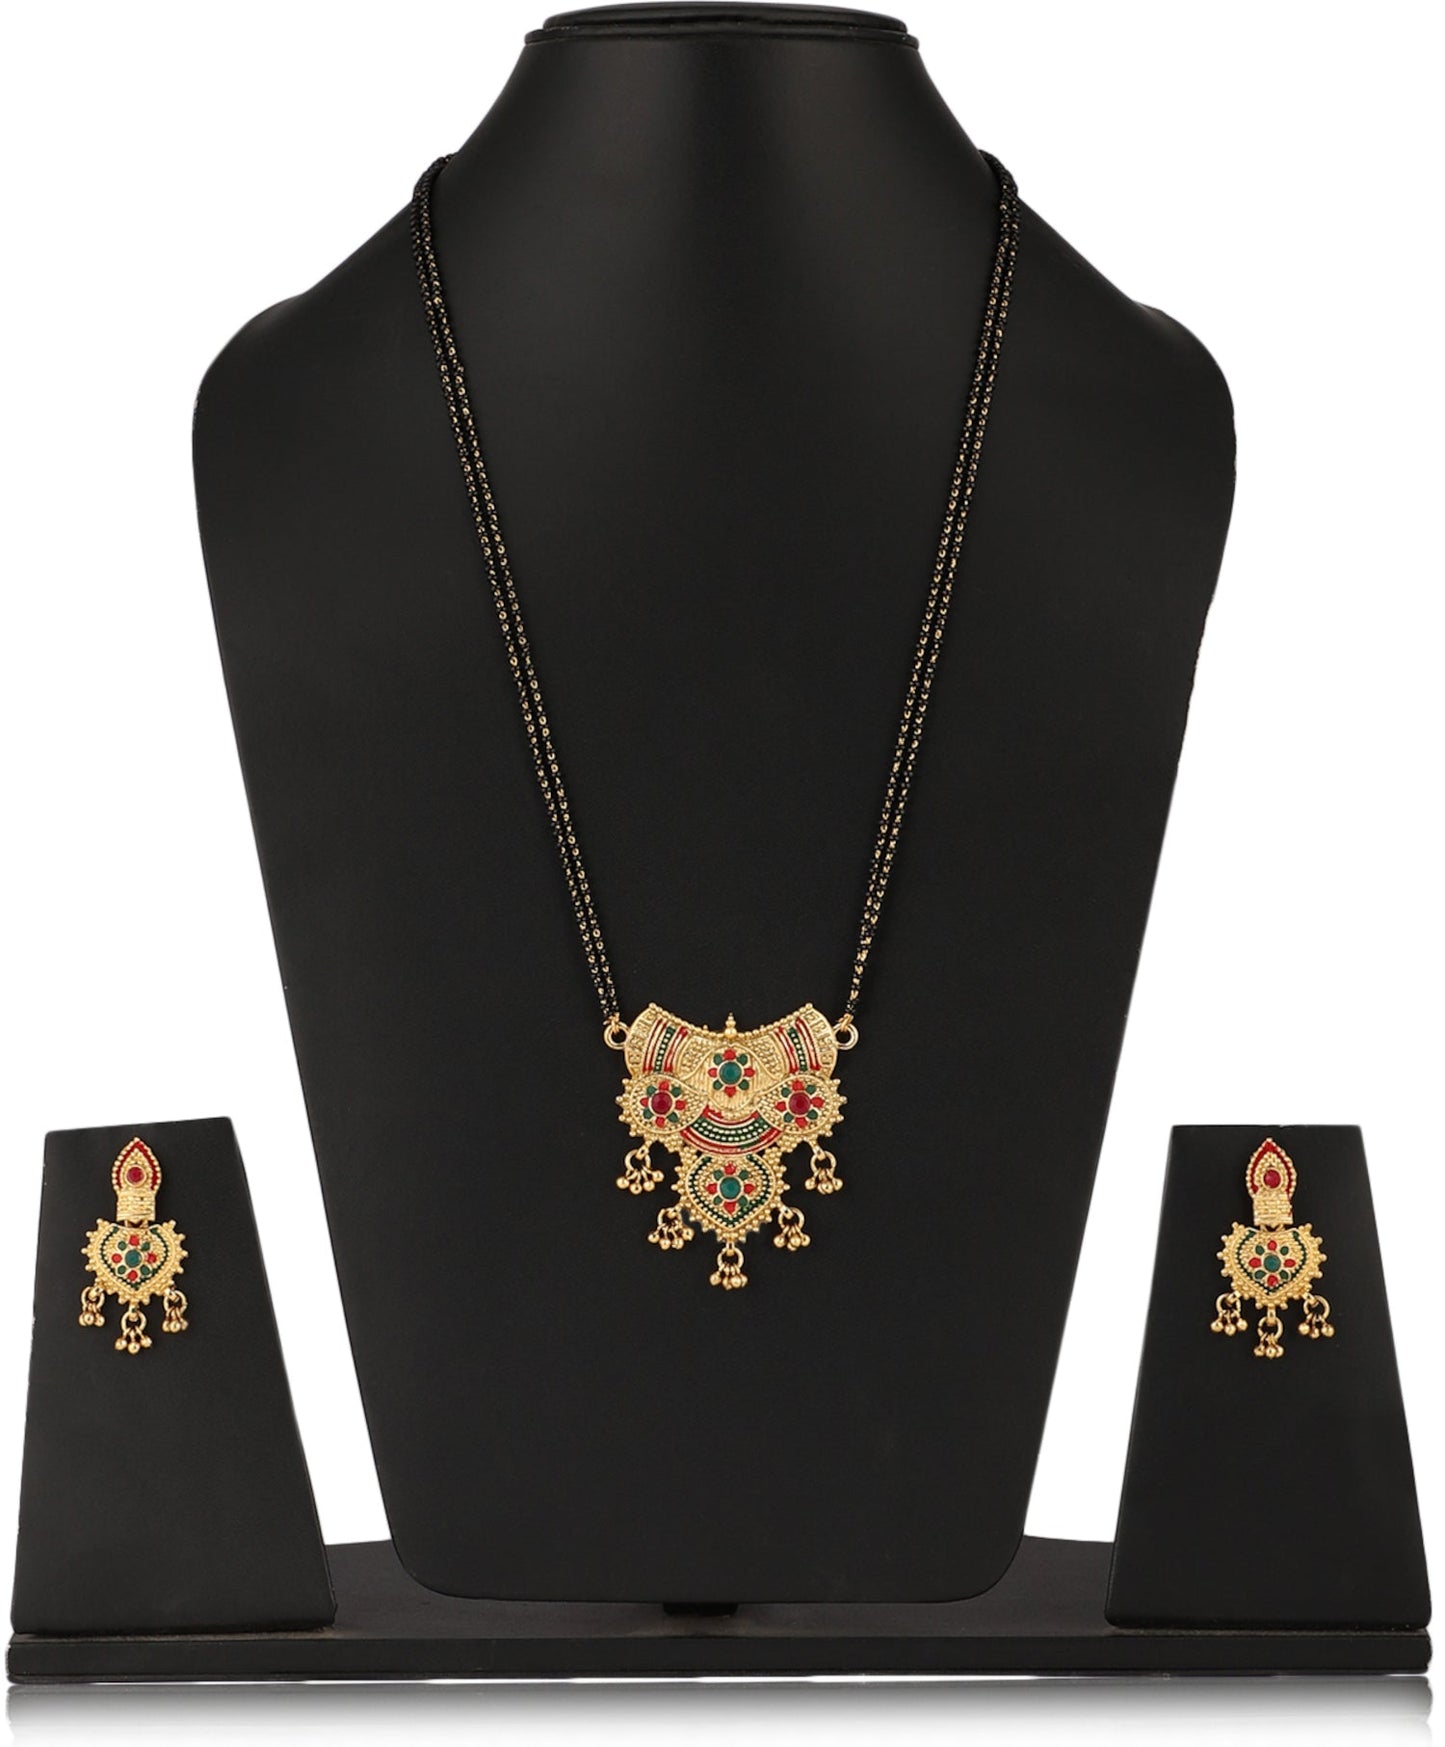  Traditional Gold Plated Mangalsutra with Earrings | Buy This Jewellery Online from Mekkna